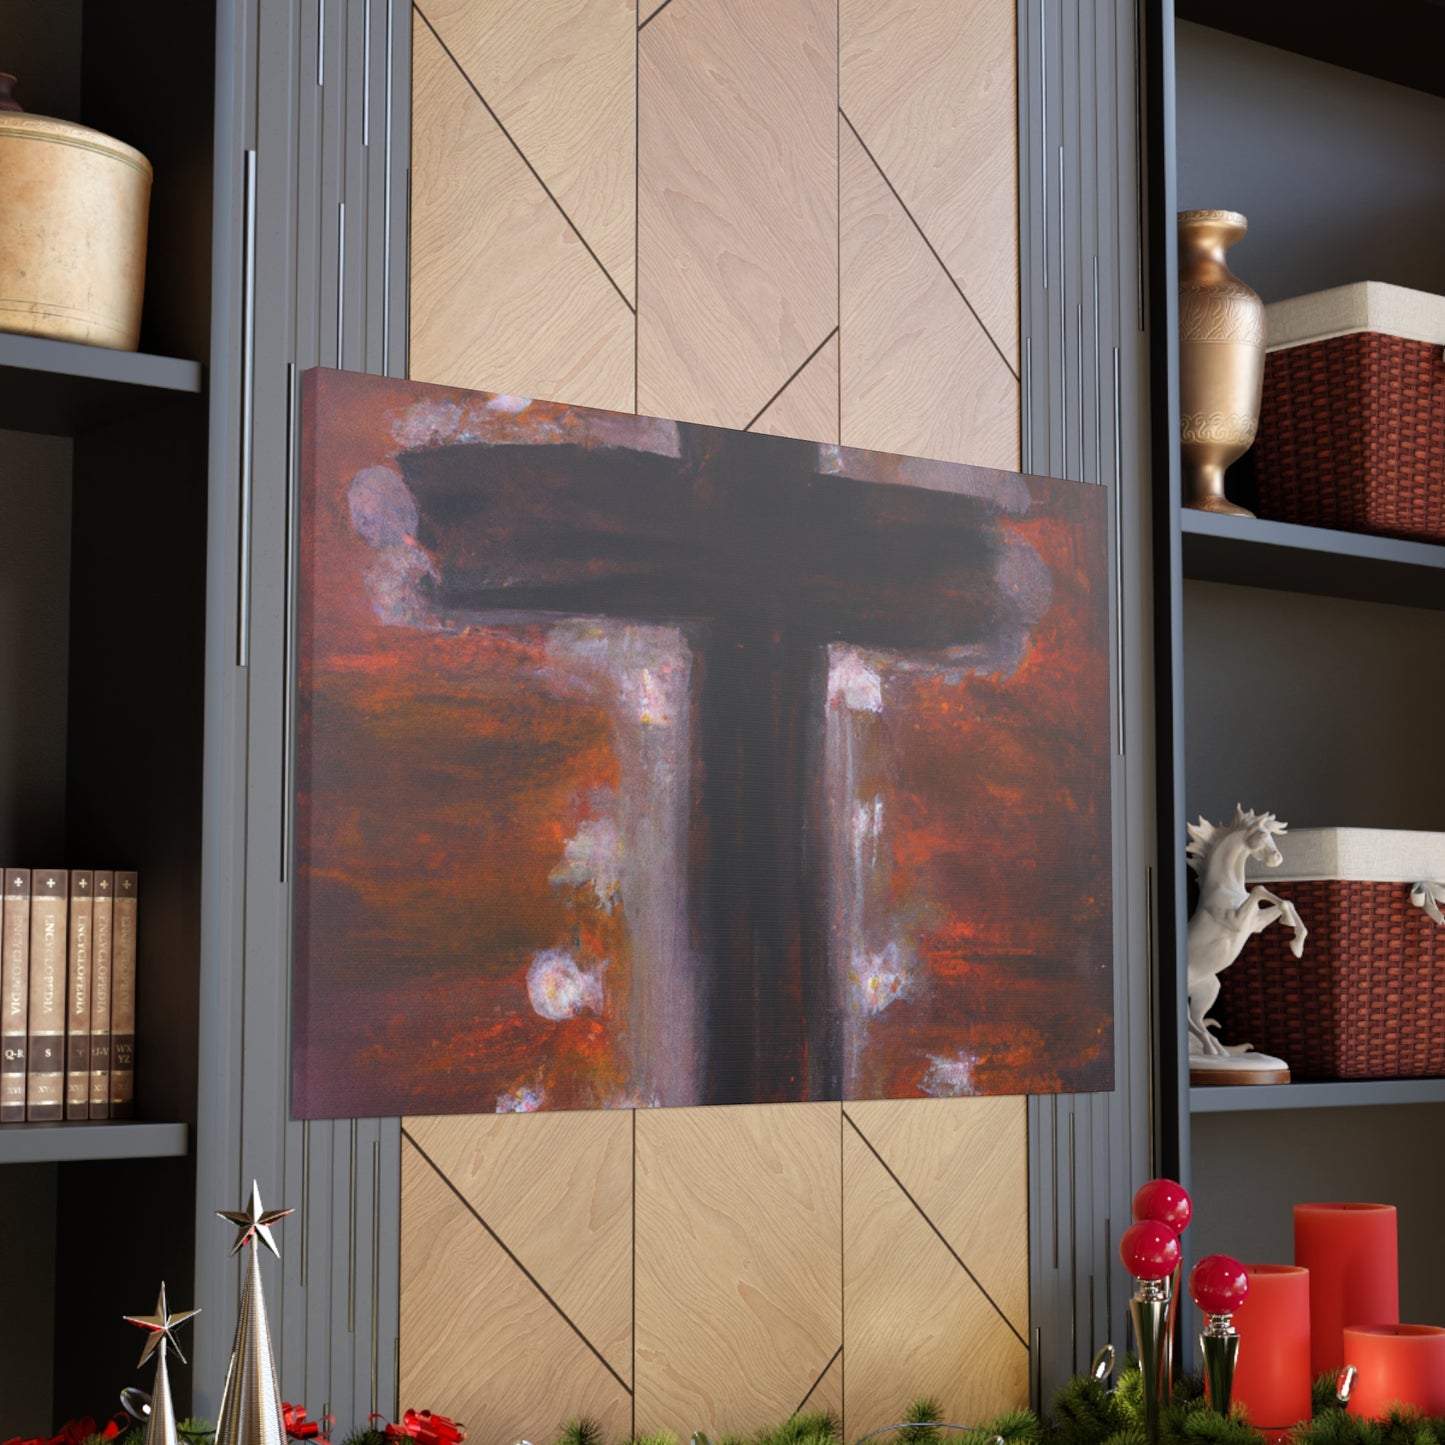 .

Psalm 116:12-13 - "What shall I render to the Lord for all his benefits to me? I will lift up the cup of salvation and call on the name of the Lord." - Canvas Wall Art